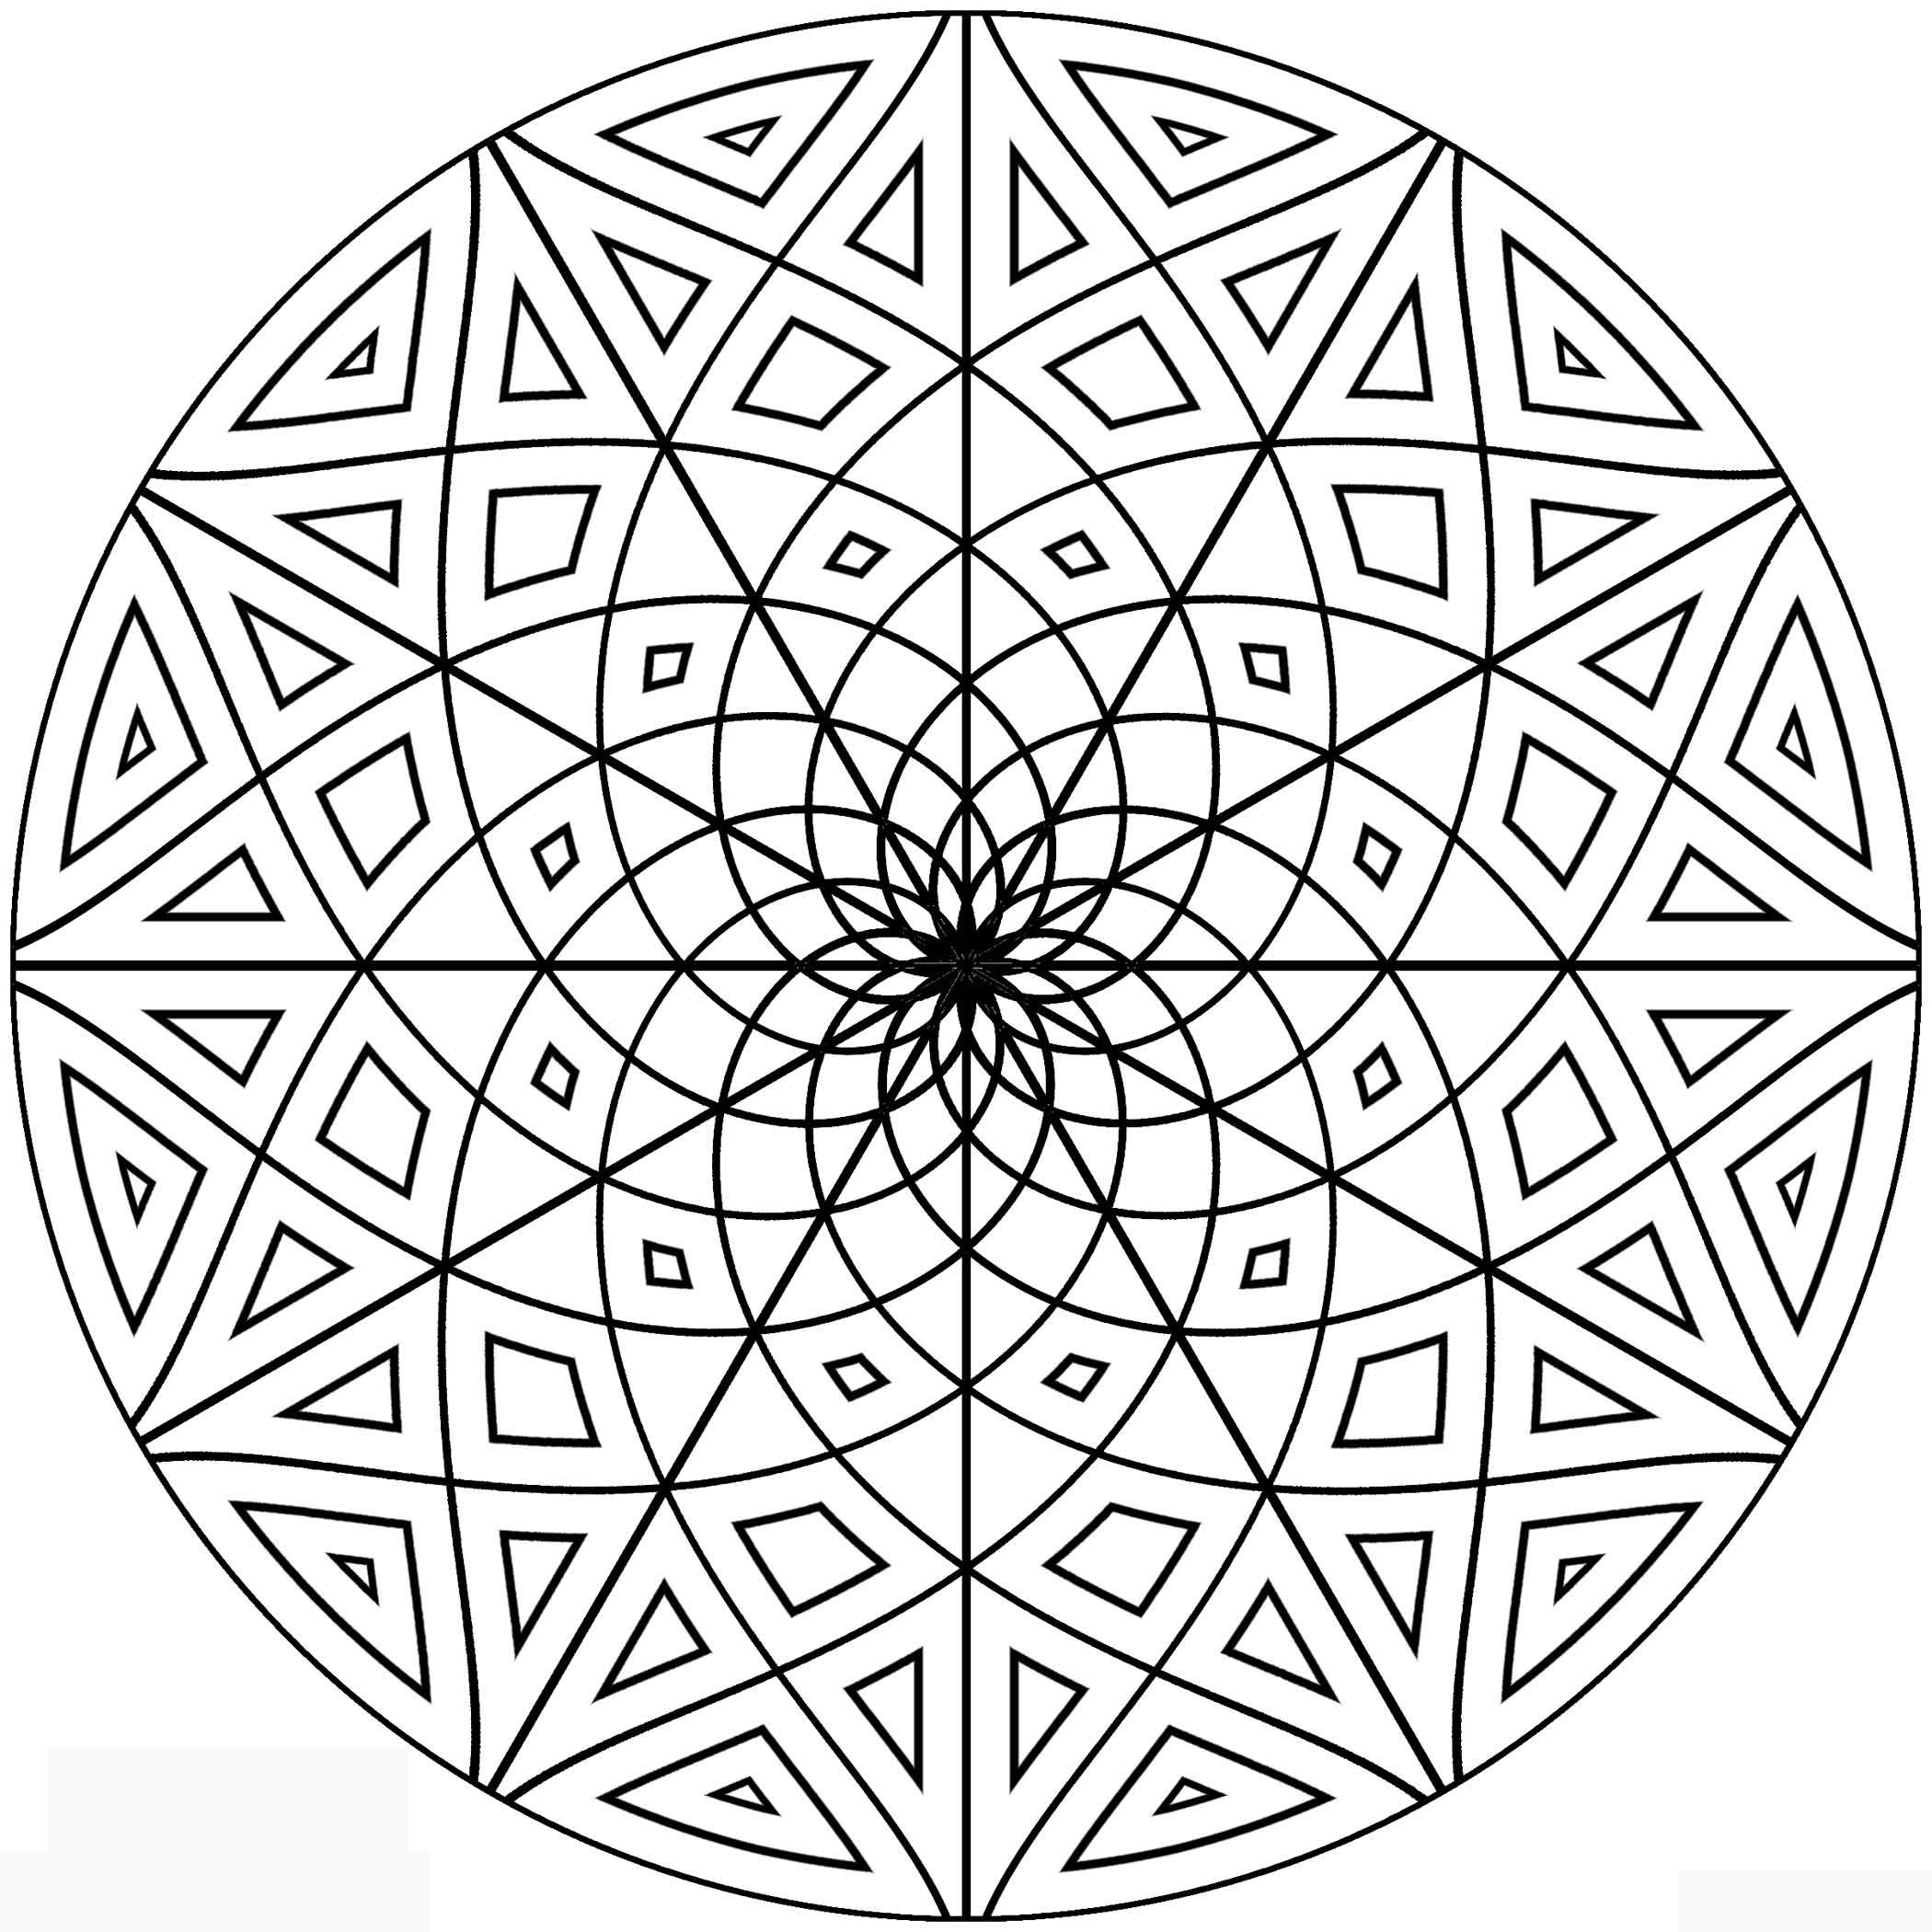 Coloring Pages Patterns
 Free Printable Geometric Coloring Pages for Adults